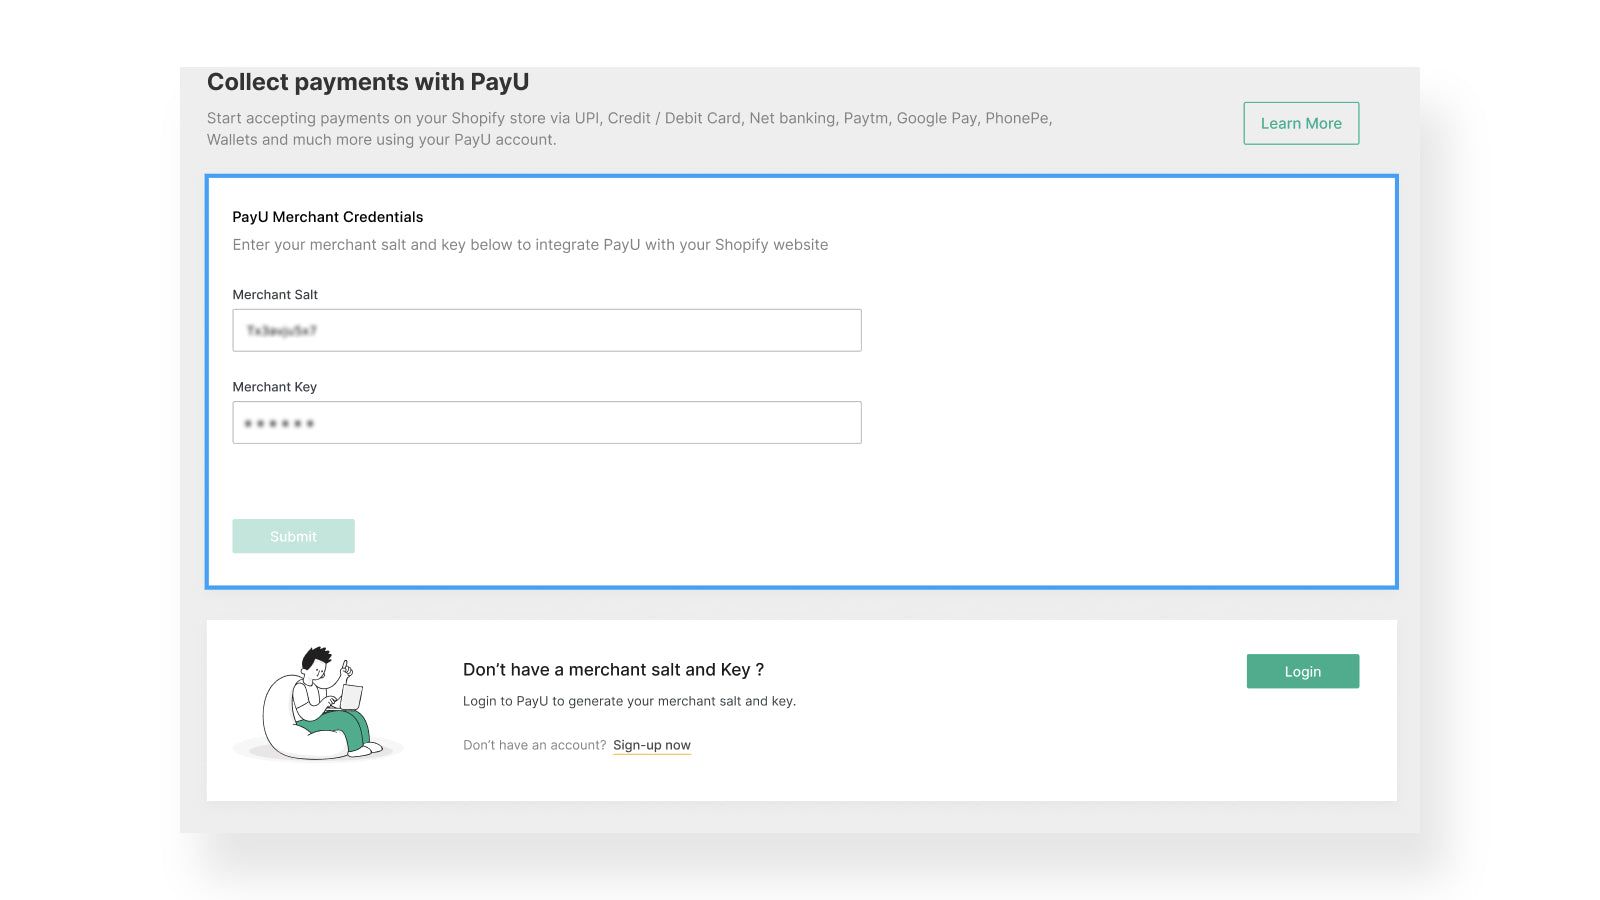 Submit your key and salt to start using PayU on your website